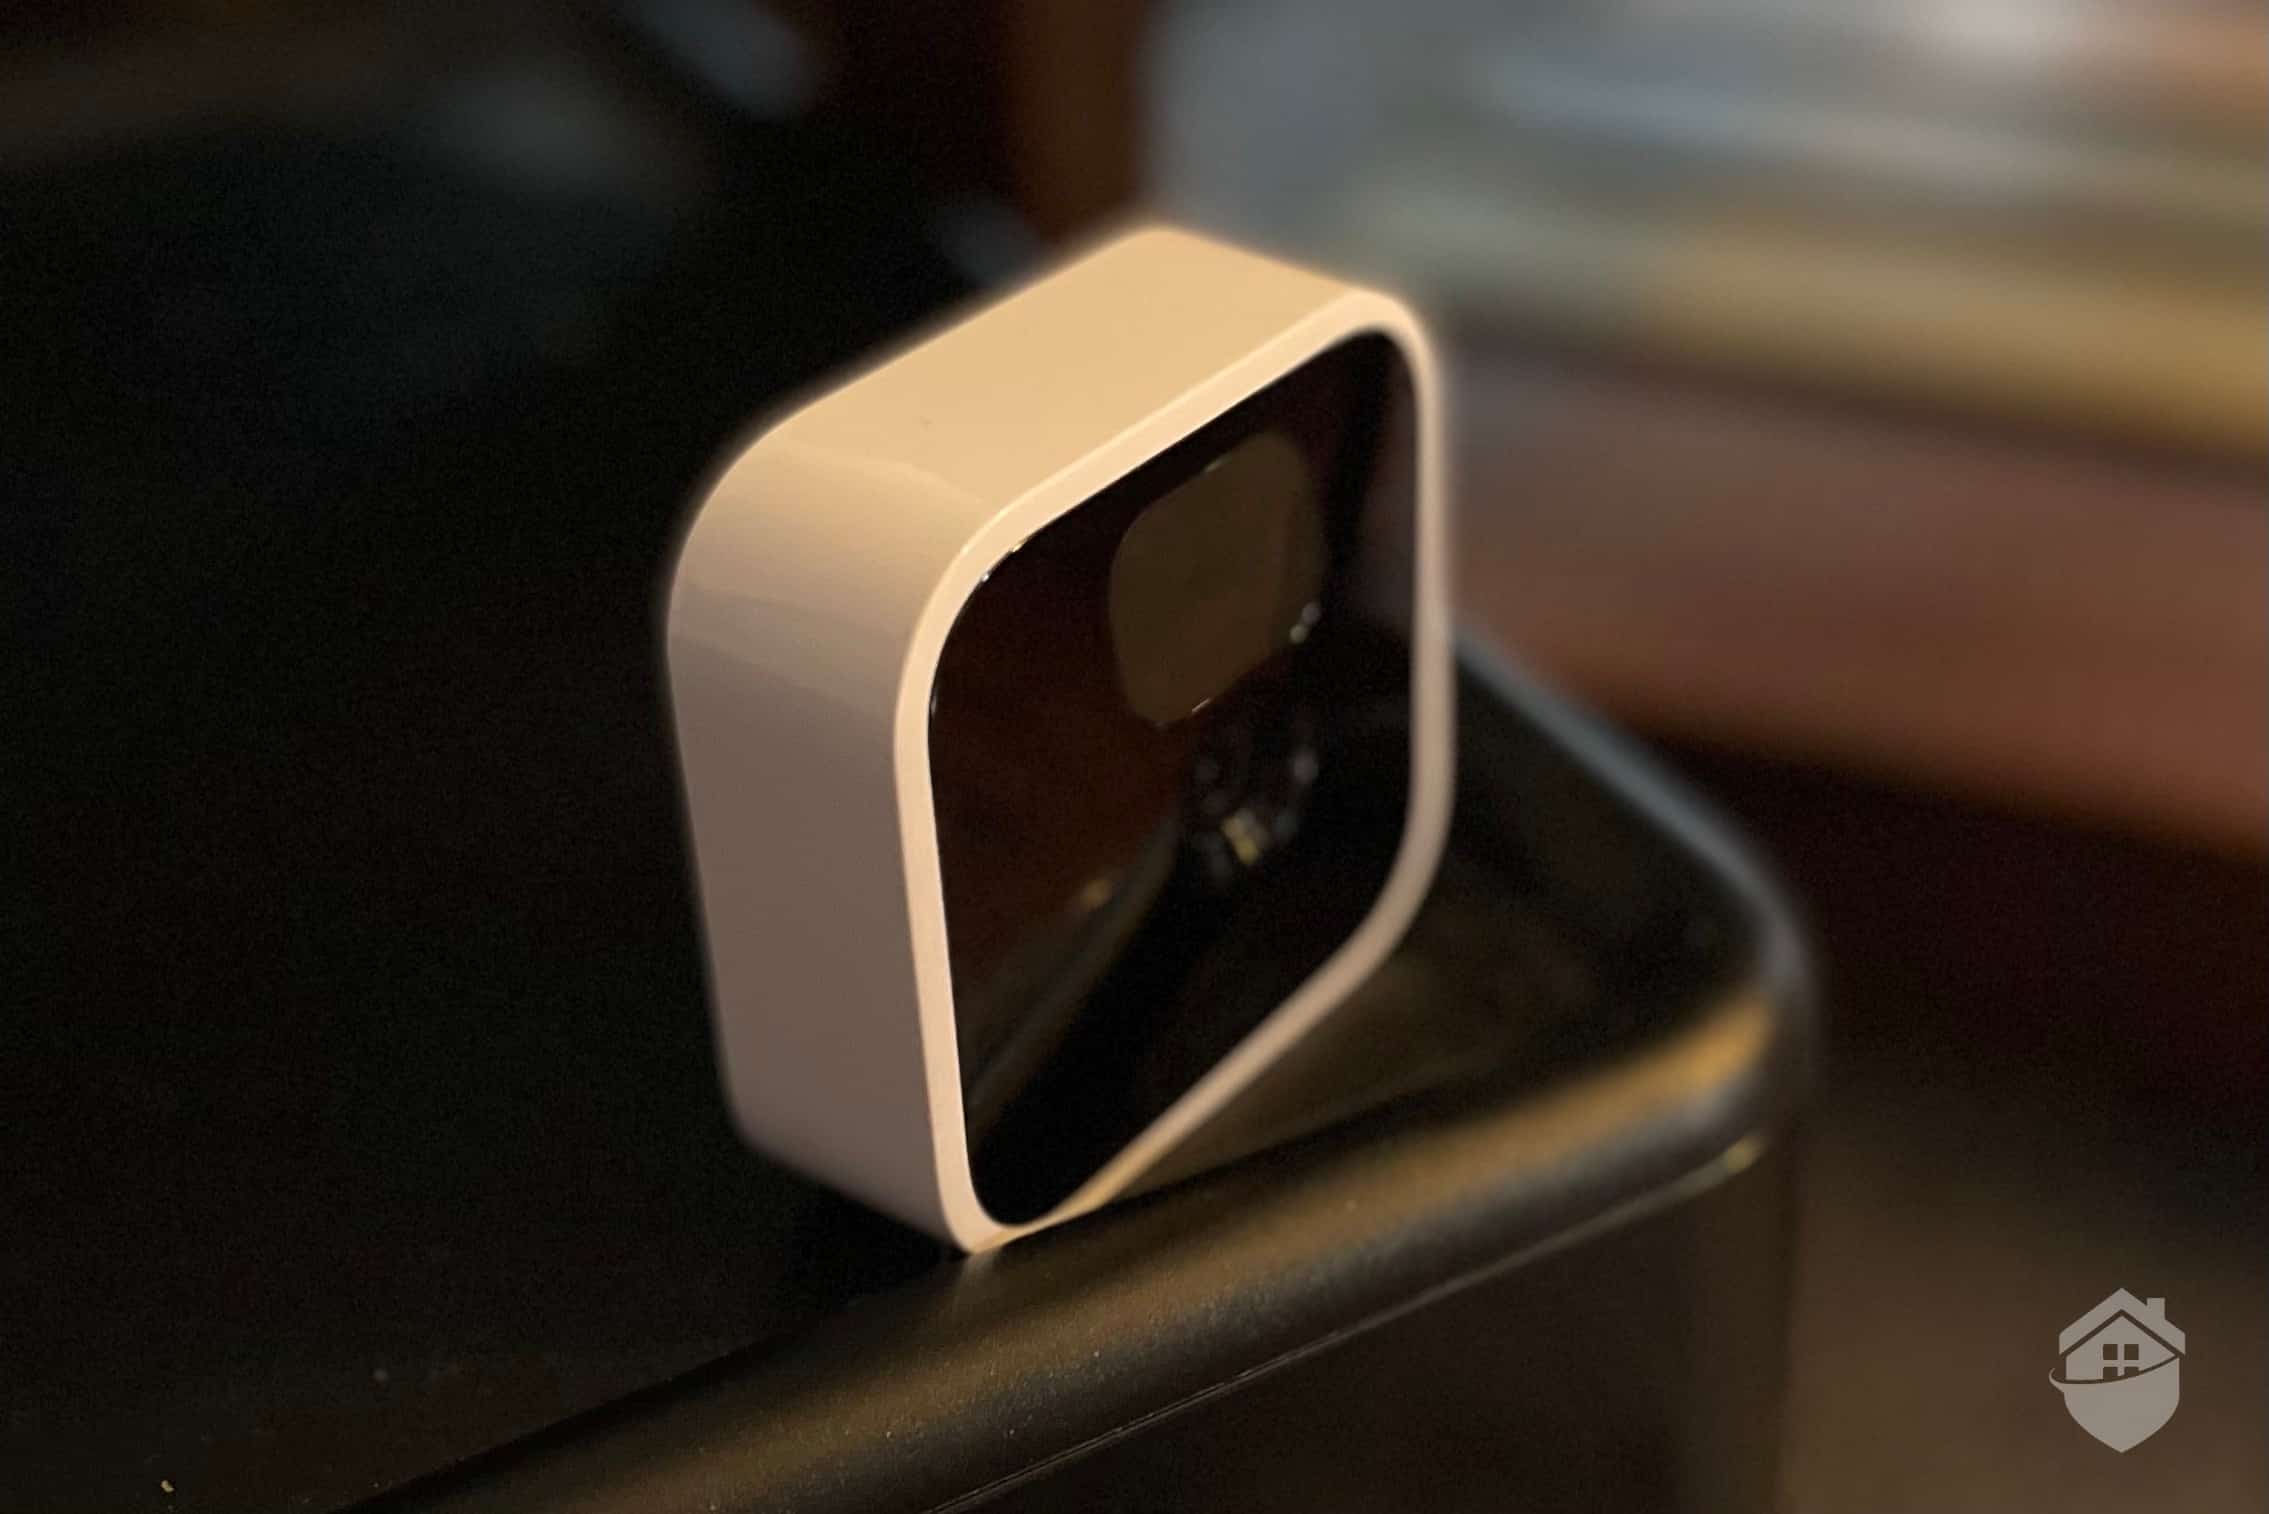 Blink Camera Review 2024: Tested by Security Experts